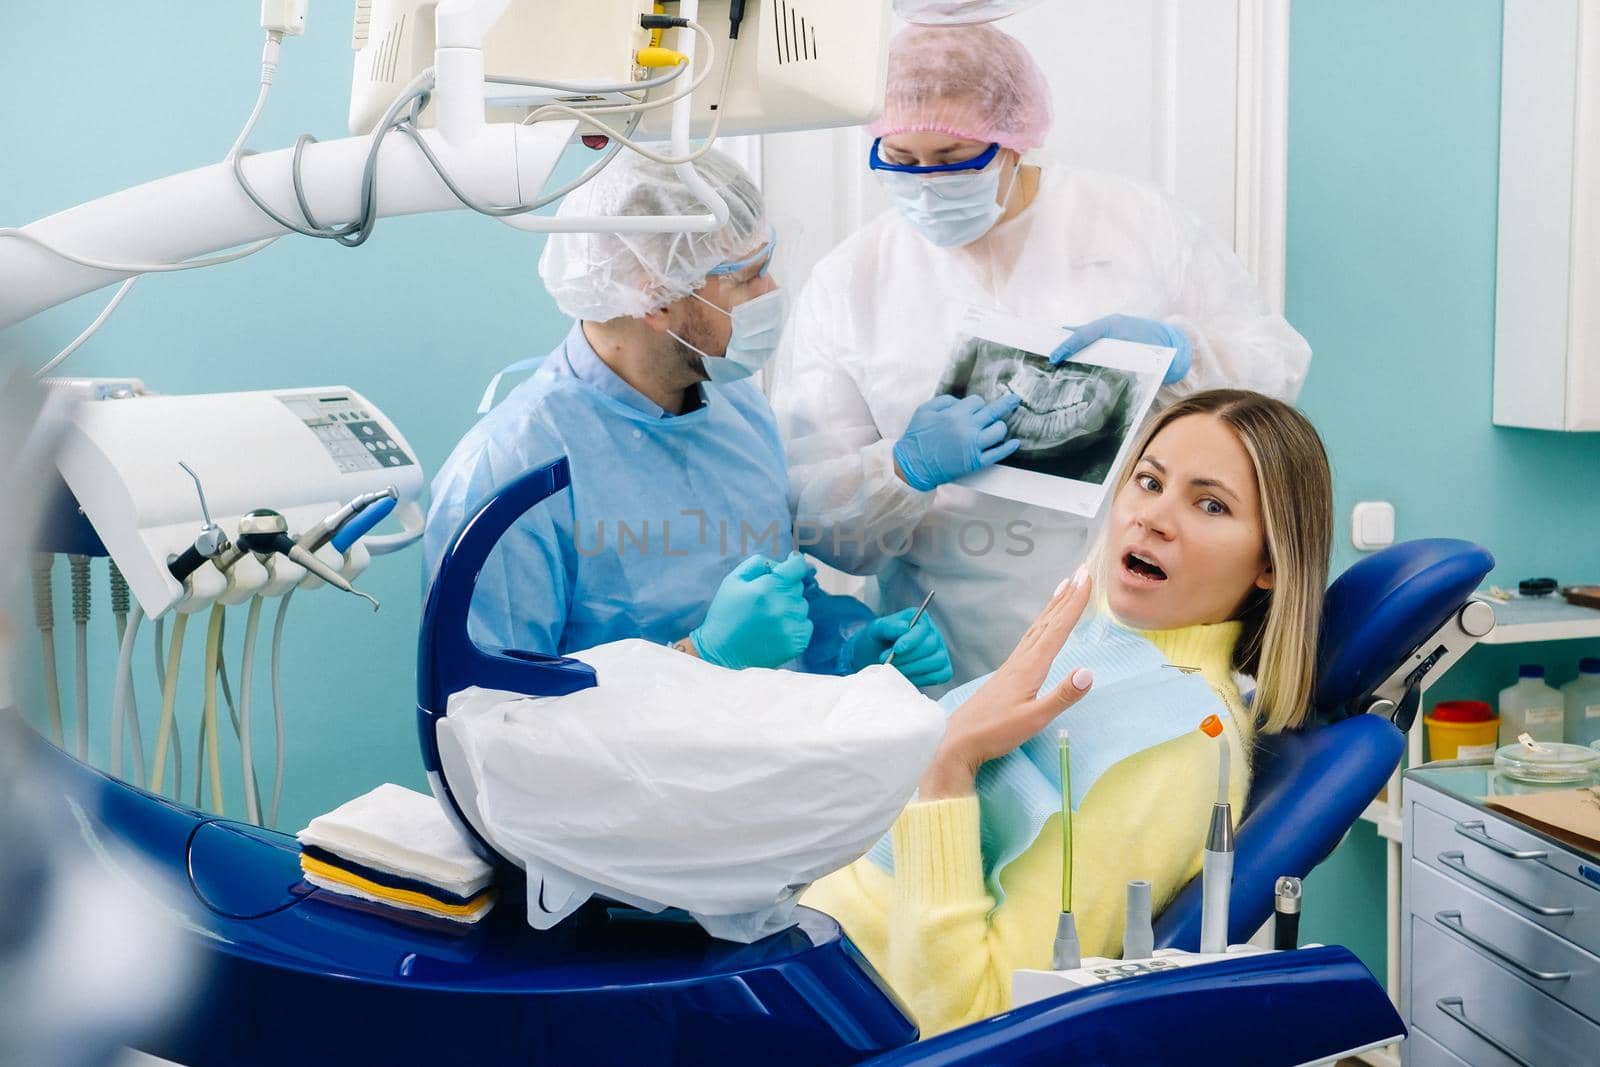 The dentist explains the details of the X-ray to his colleague, the patient is surprised by what is happening by Lobachad